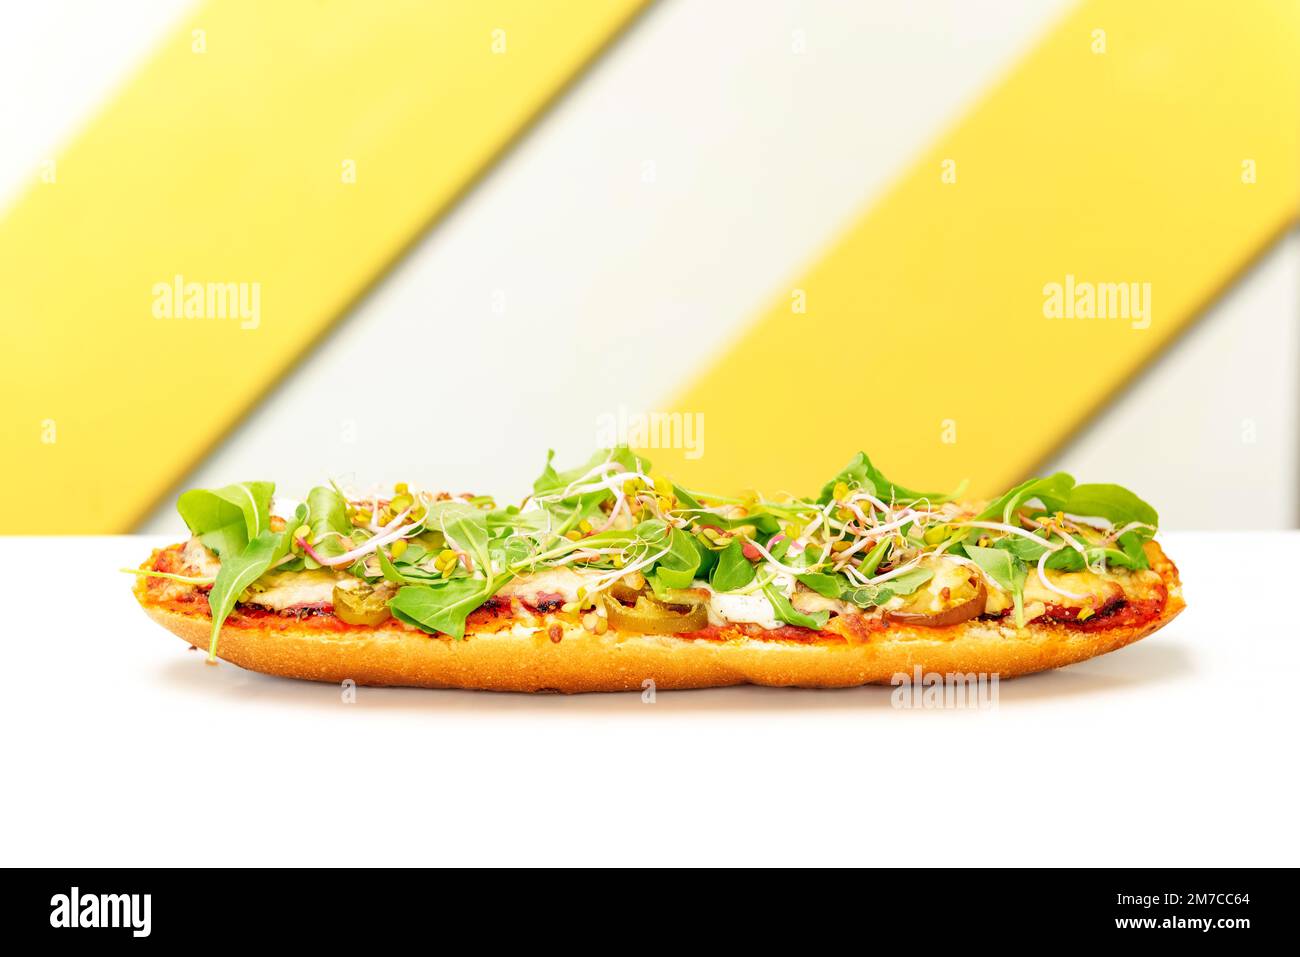 baguette with tomato sauce, meat, jalapeno and arugula baked with cheese. popular street fast food Stock Photo